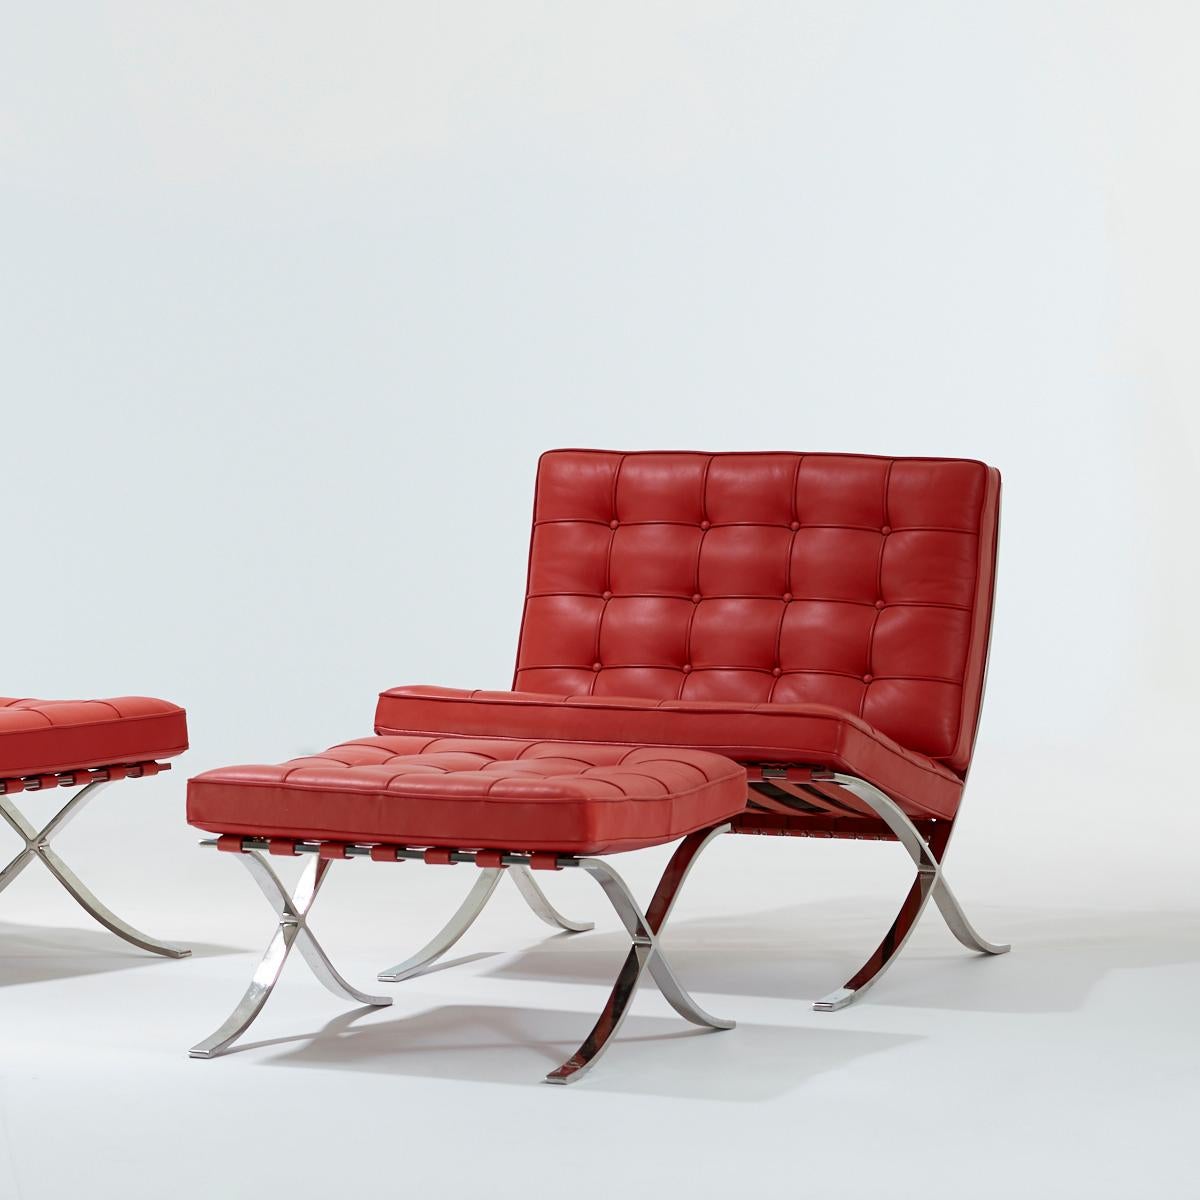 Ludwig Mies van der Rohe for Knoll pair of Barcelona chairs and ottomans 

Custom ordered red leather
Labelled and dated 'Knoll Group'

Set custom ordered with all original materials intact

Measures 
Chair 30 W × 30 D × 30 H in (each)
Ottoman 24.5